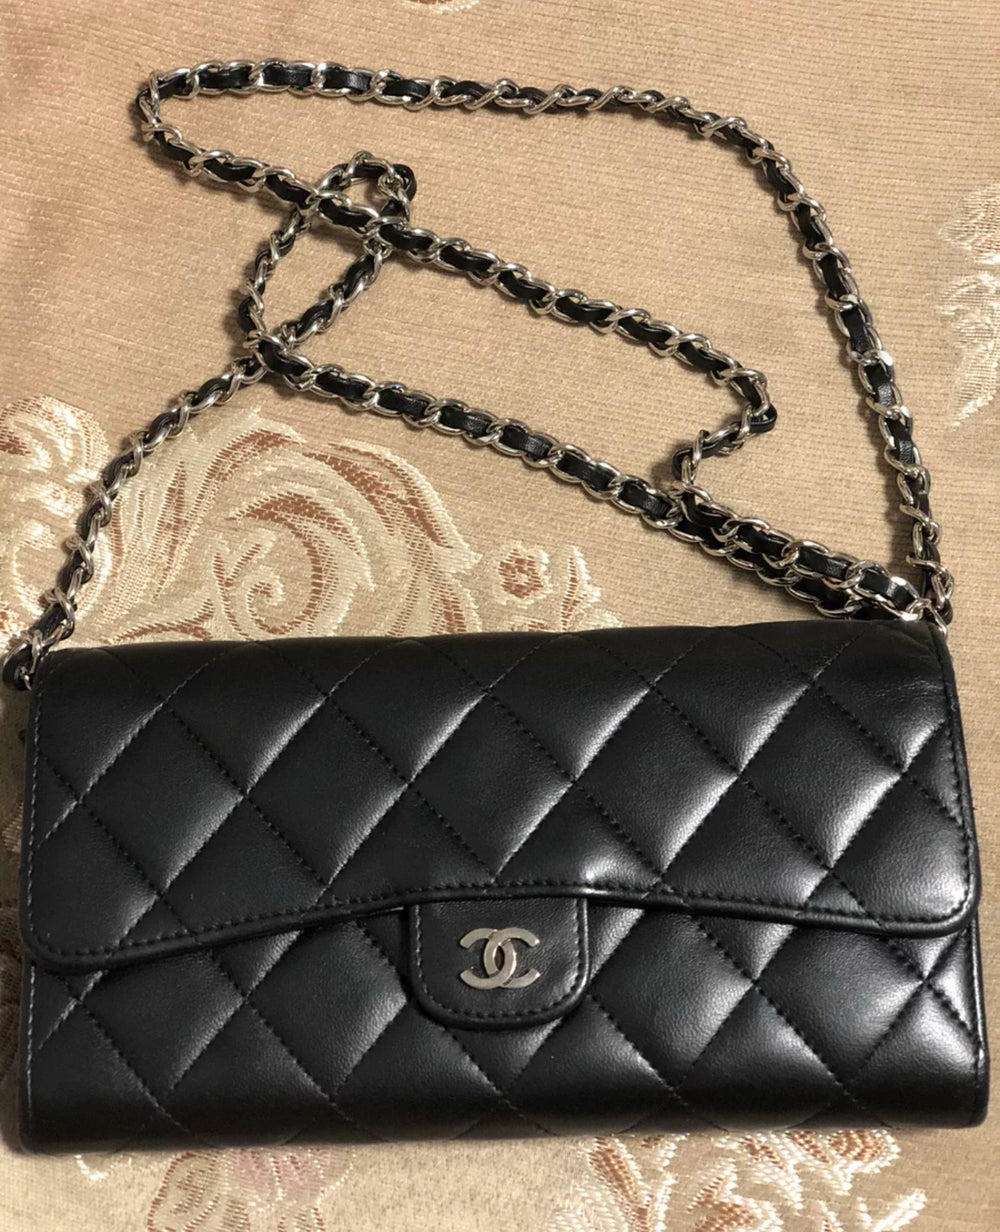 Chloe M. review of Converter Kit for Chanel Long Wallet